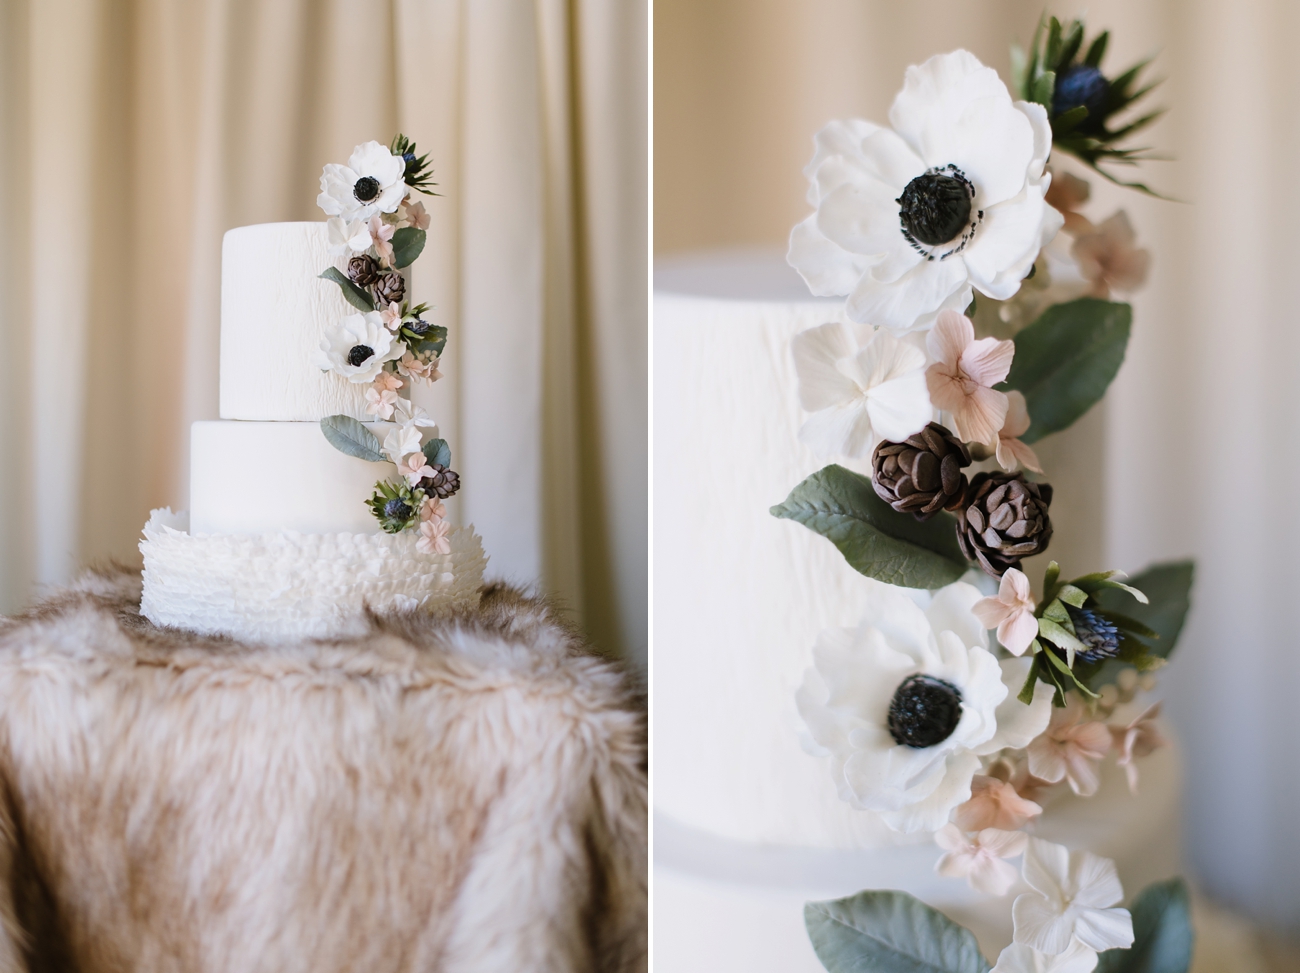 White Wedding Cake with a Ruffle Texture & Painted Sugar Flowers of Anemones, Gardenia, and Pinecones. | Natalie Franke Photography